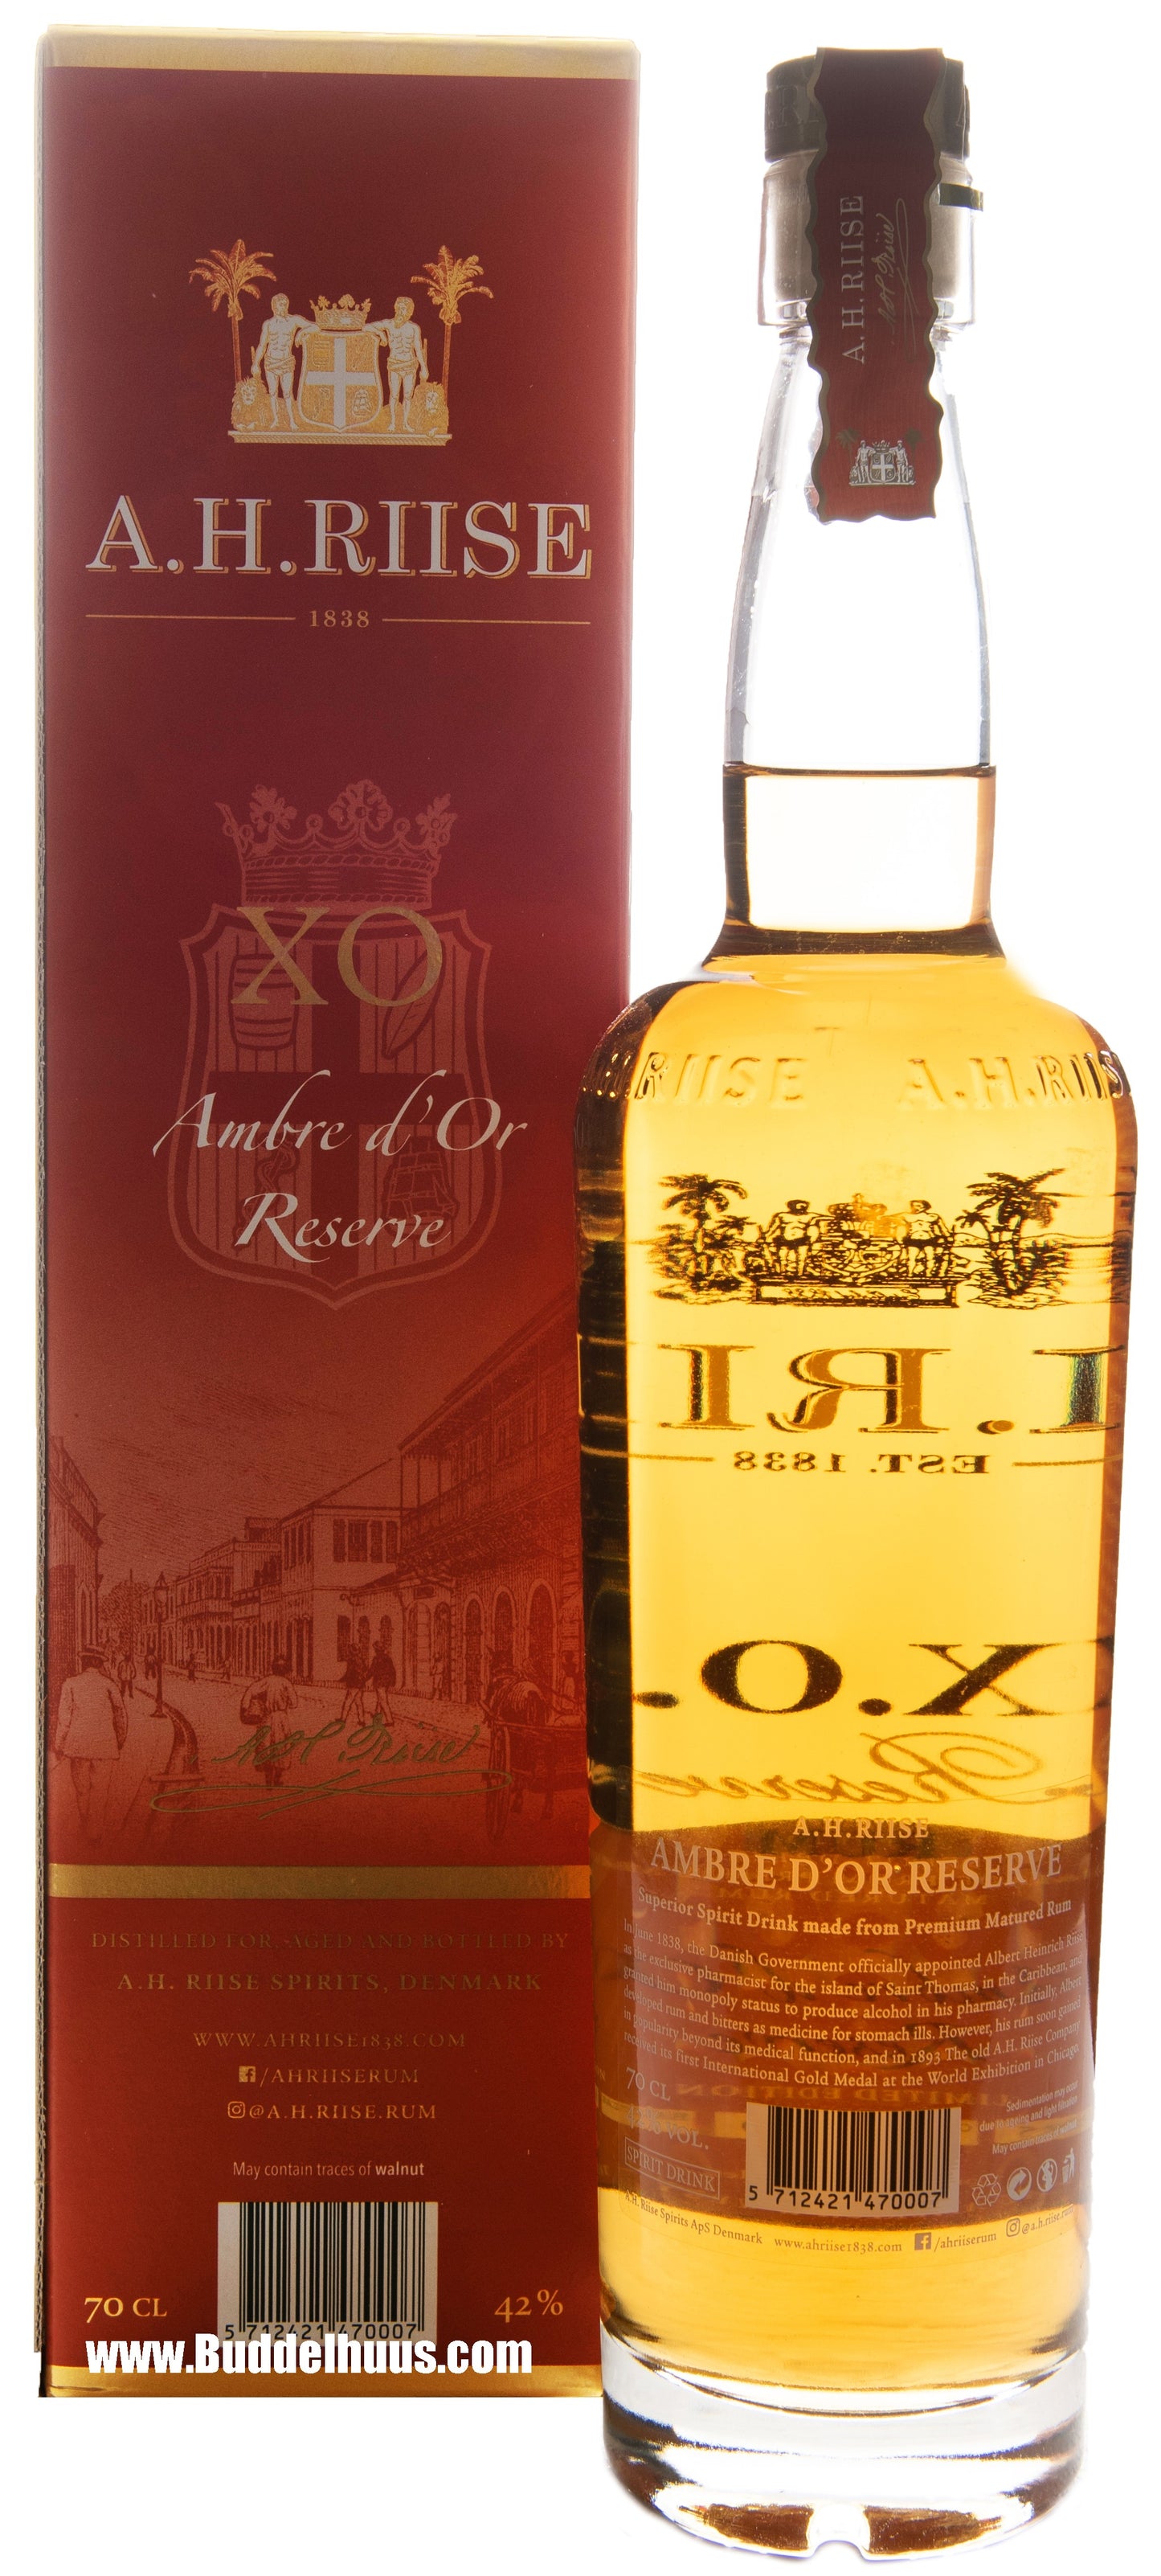 A.H. Riise XO Reserve Ambre D'or Excellence